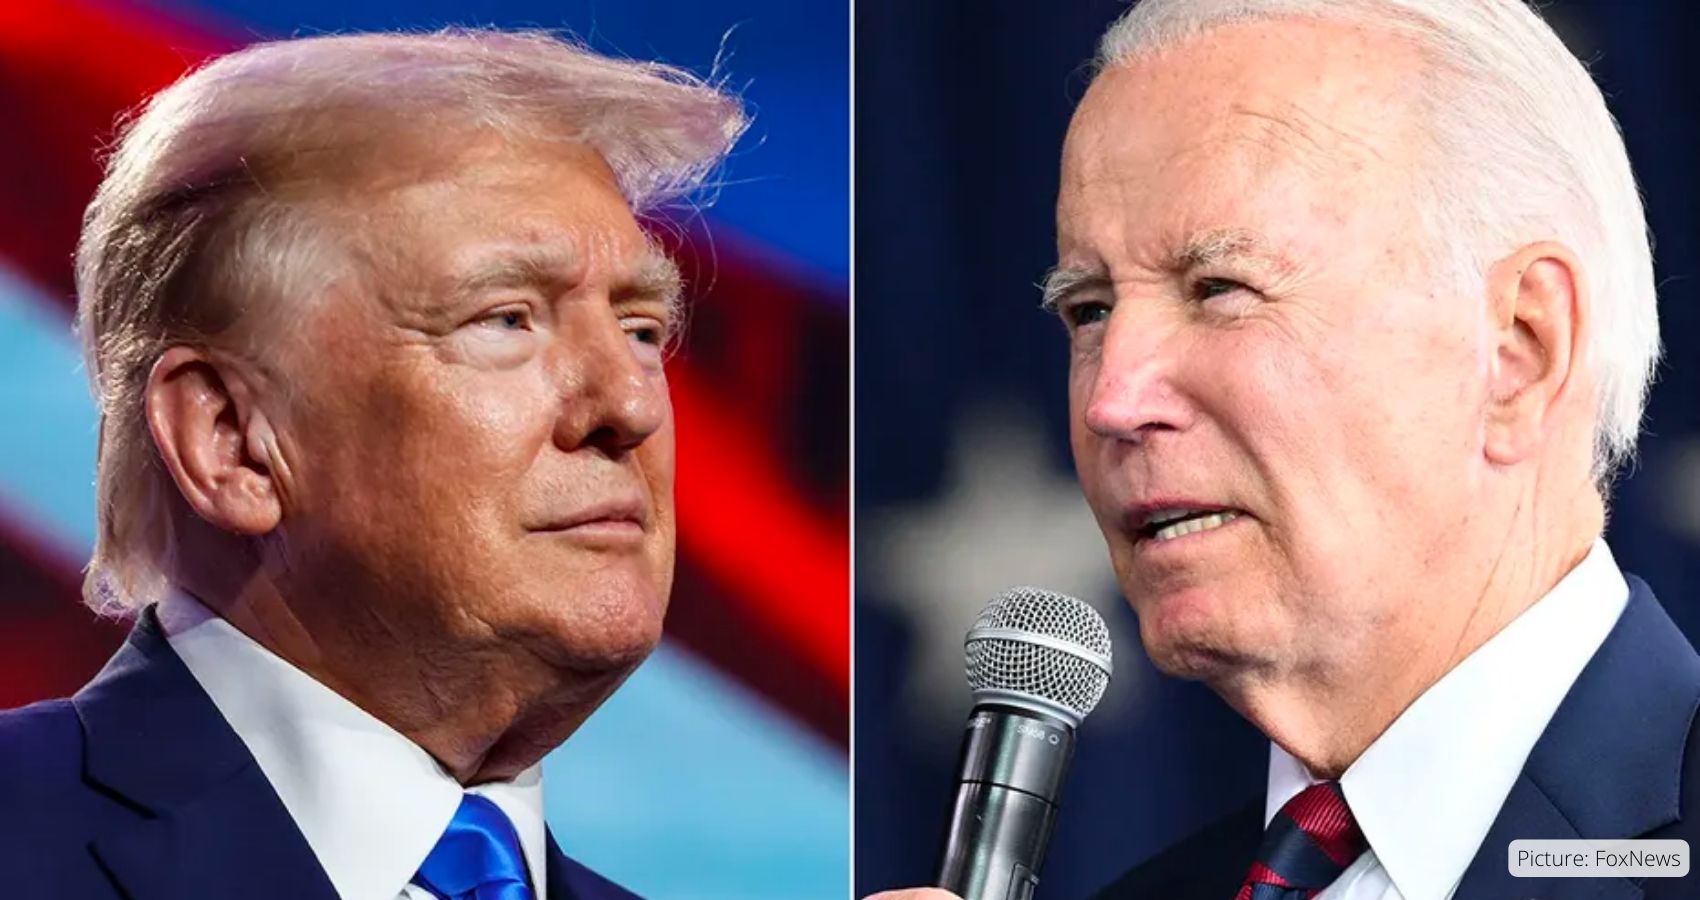 Biden’s Approval Hits Record Low at 34% Amidst Growing Concerns and Trailing Trump in Polls